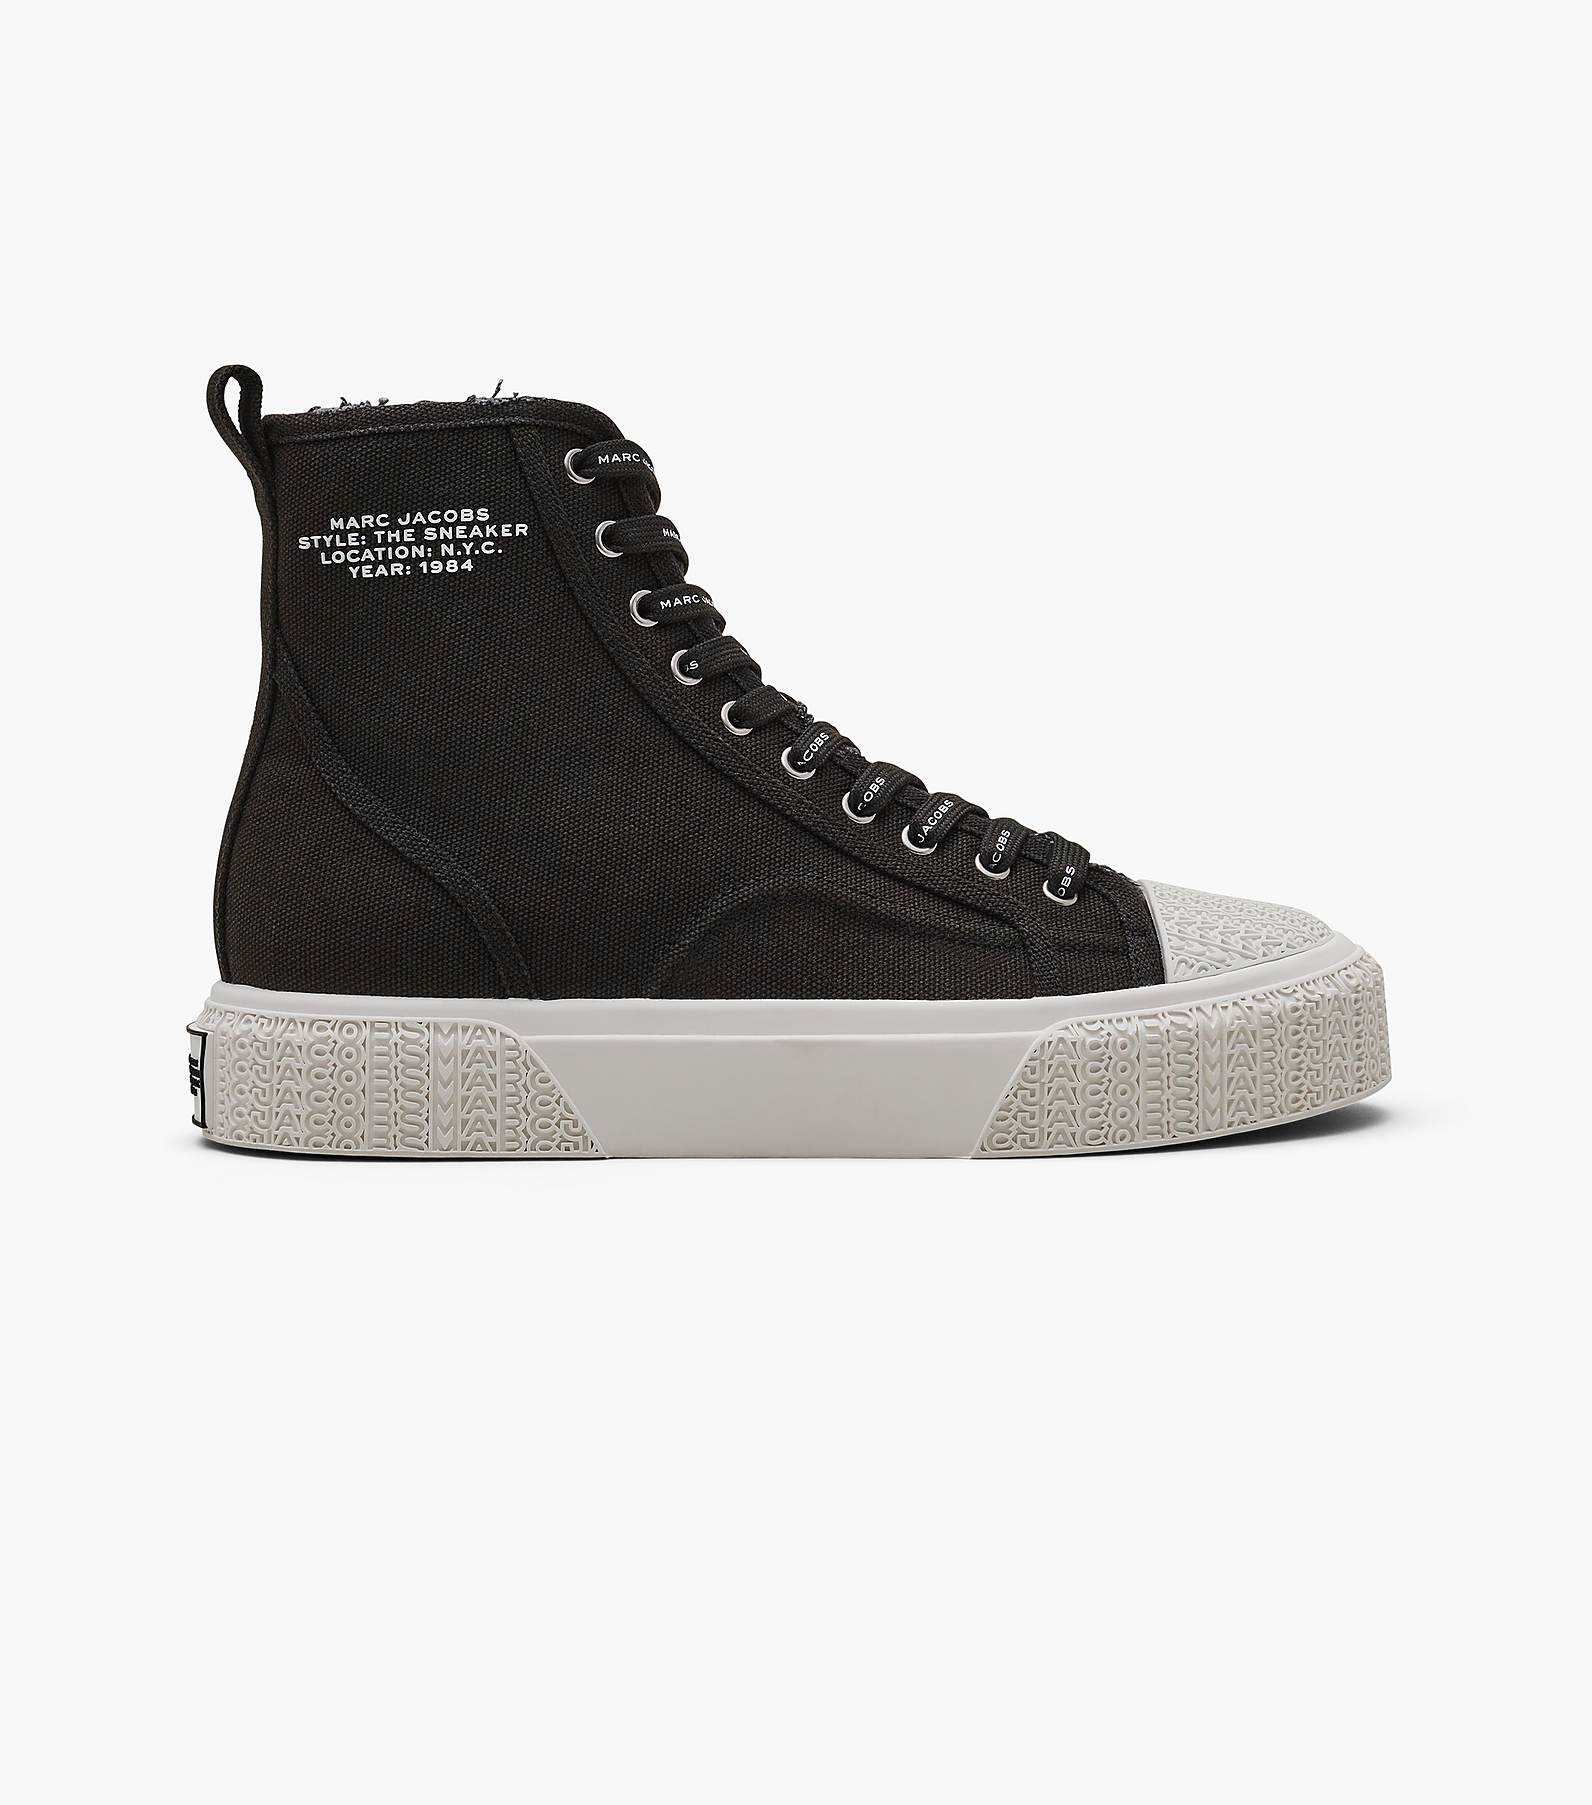 THE CANVAS HIGH TOP SNEAKER